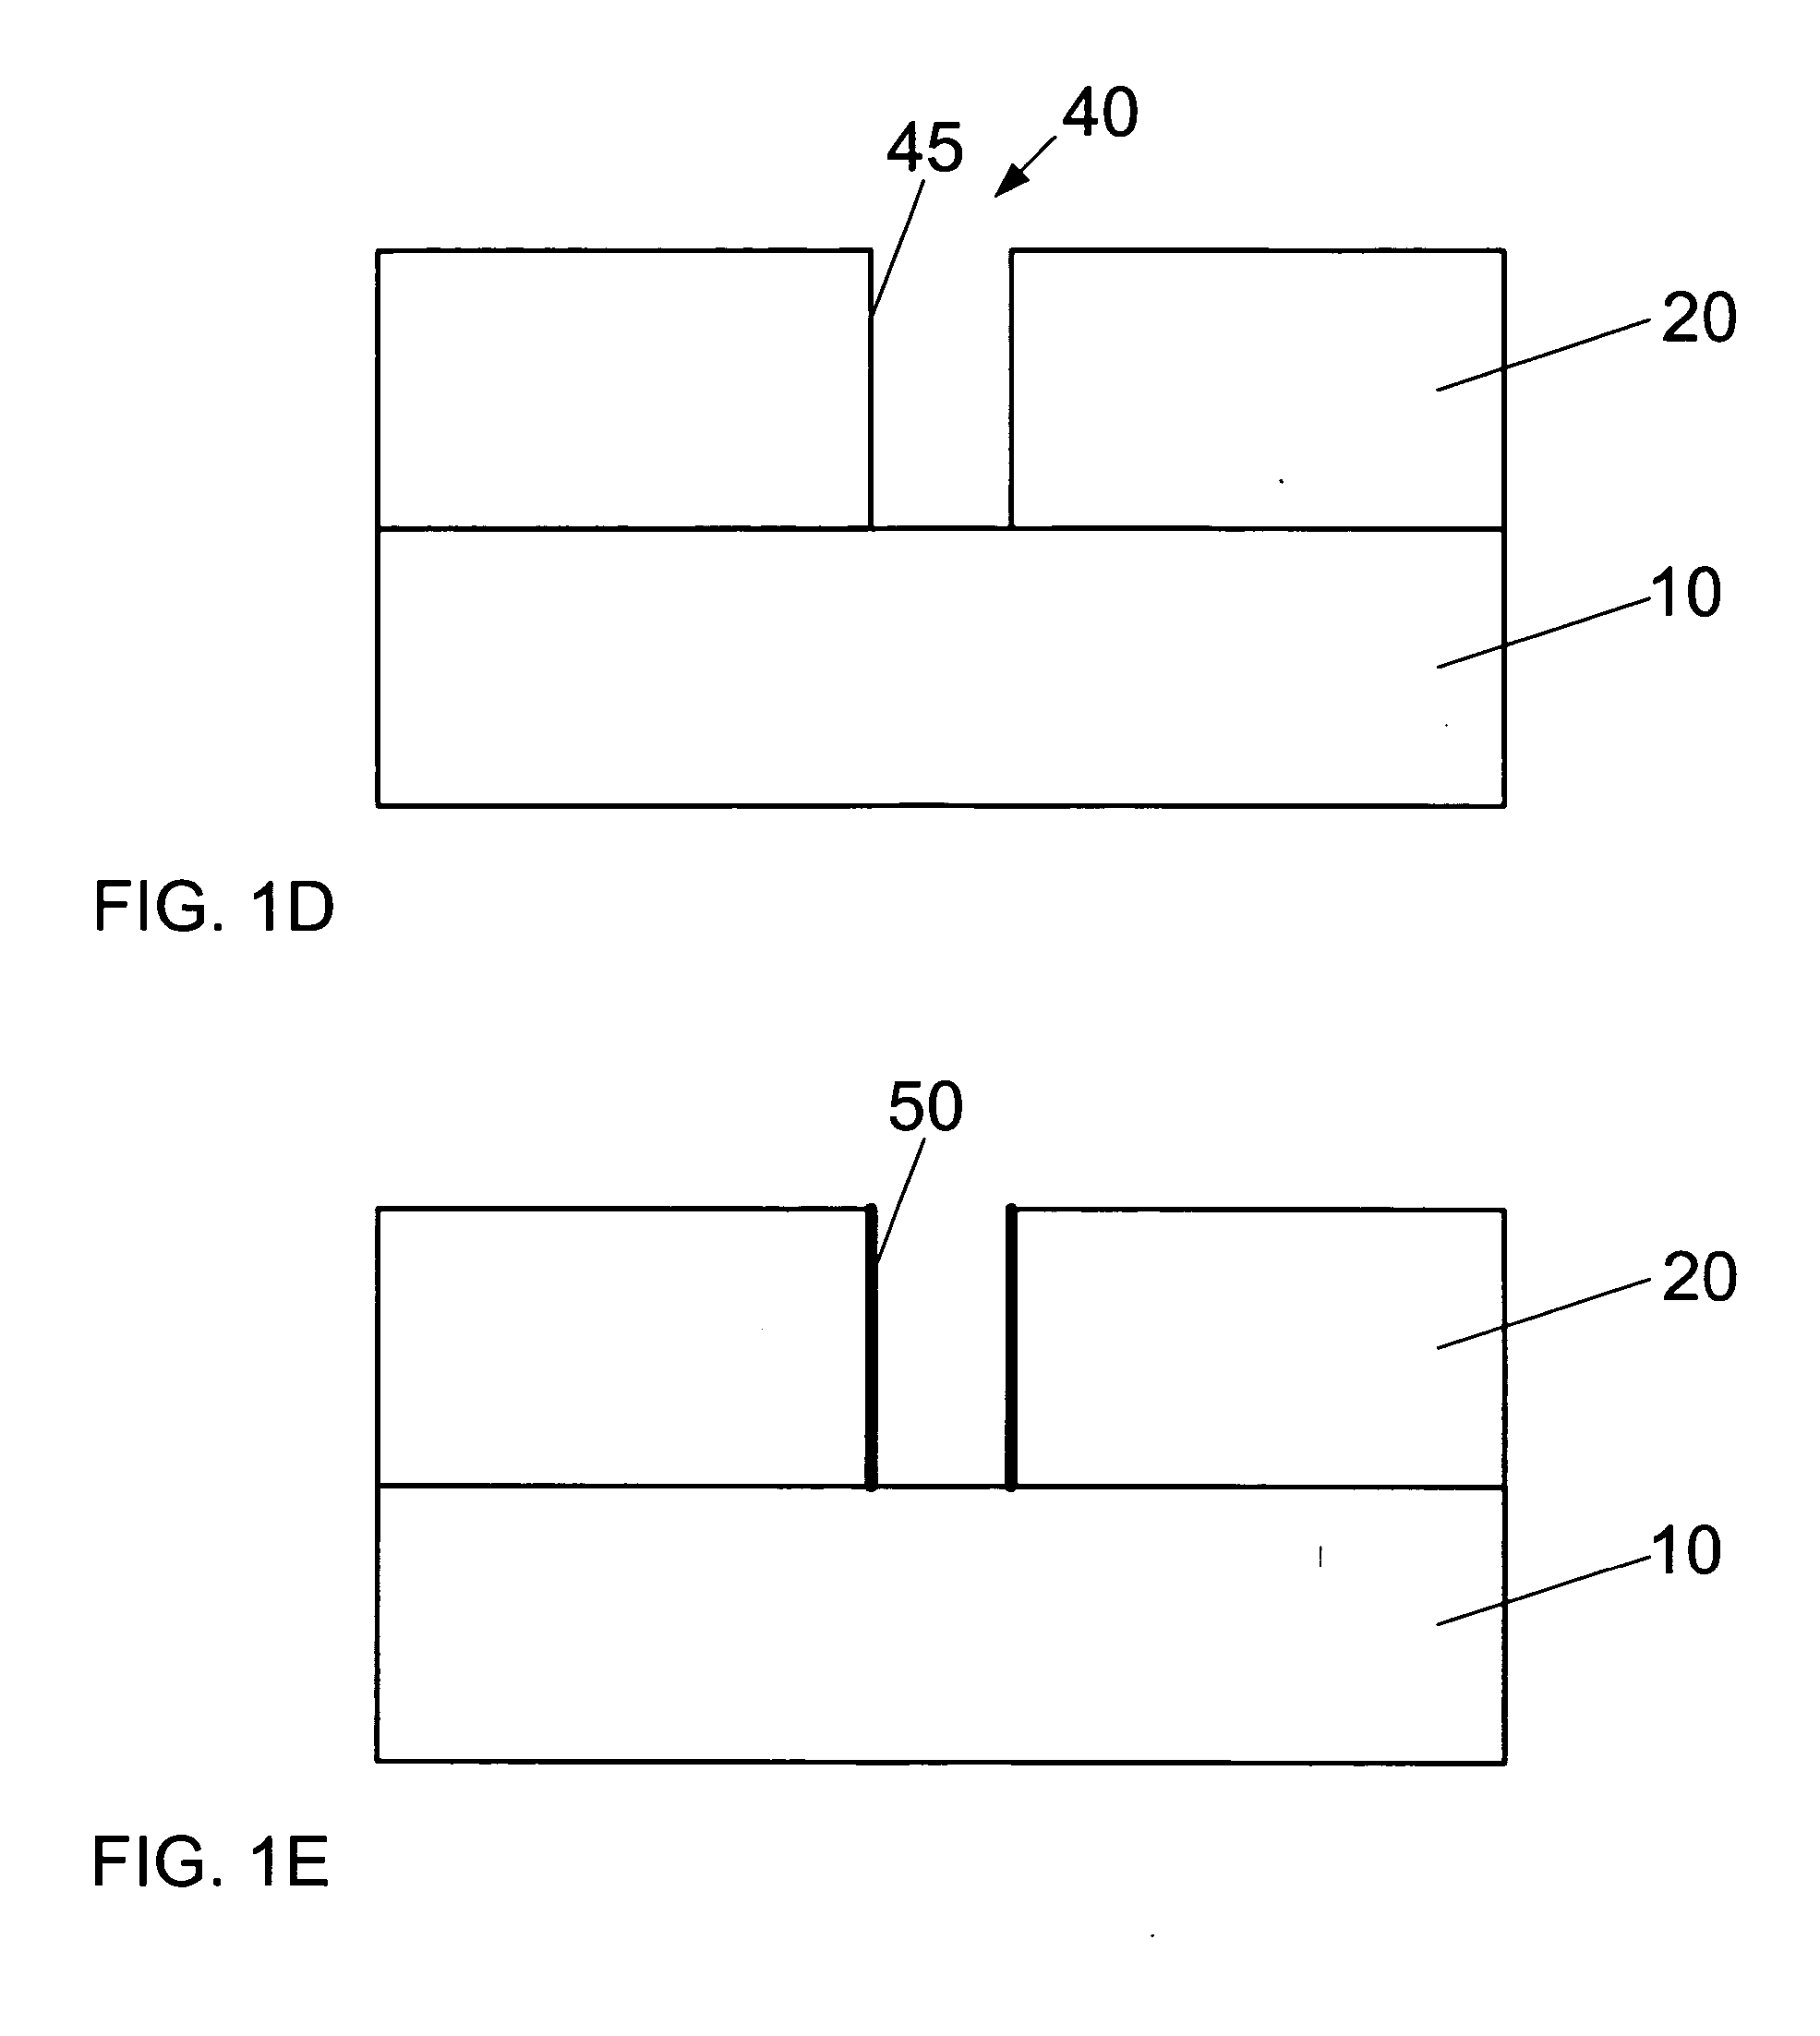 Treatment of low dielectric constant films using a batch processing system